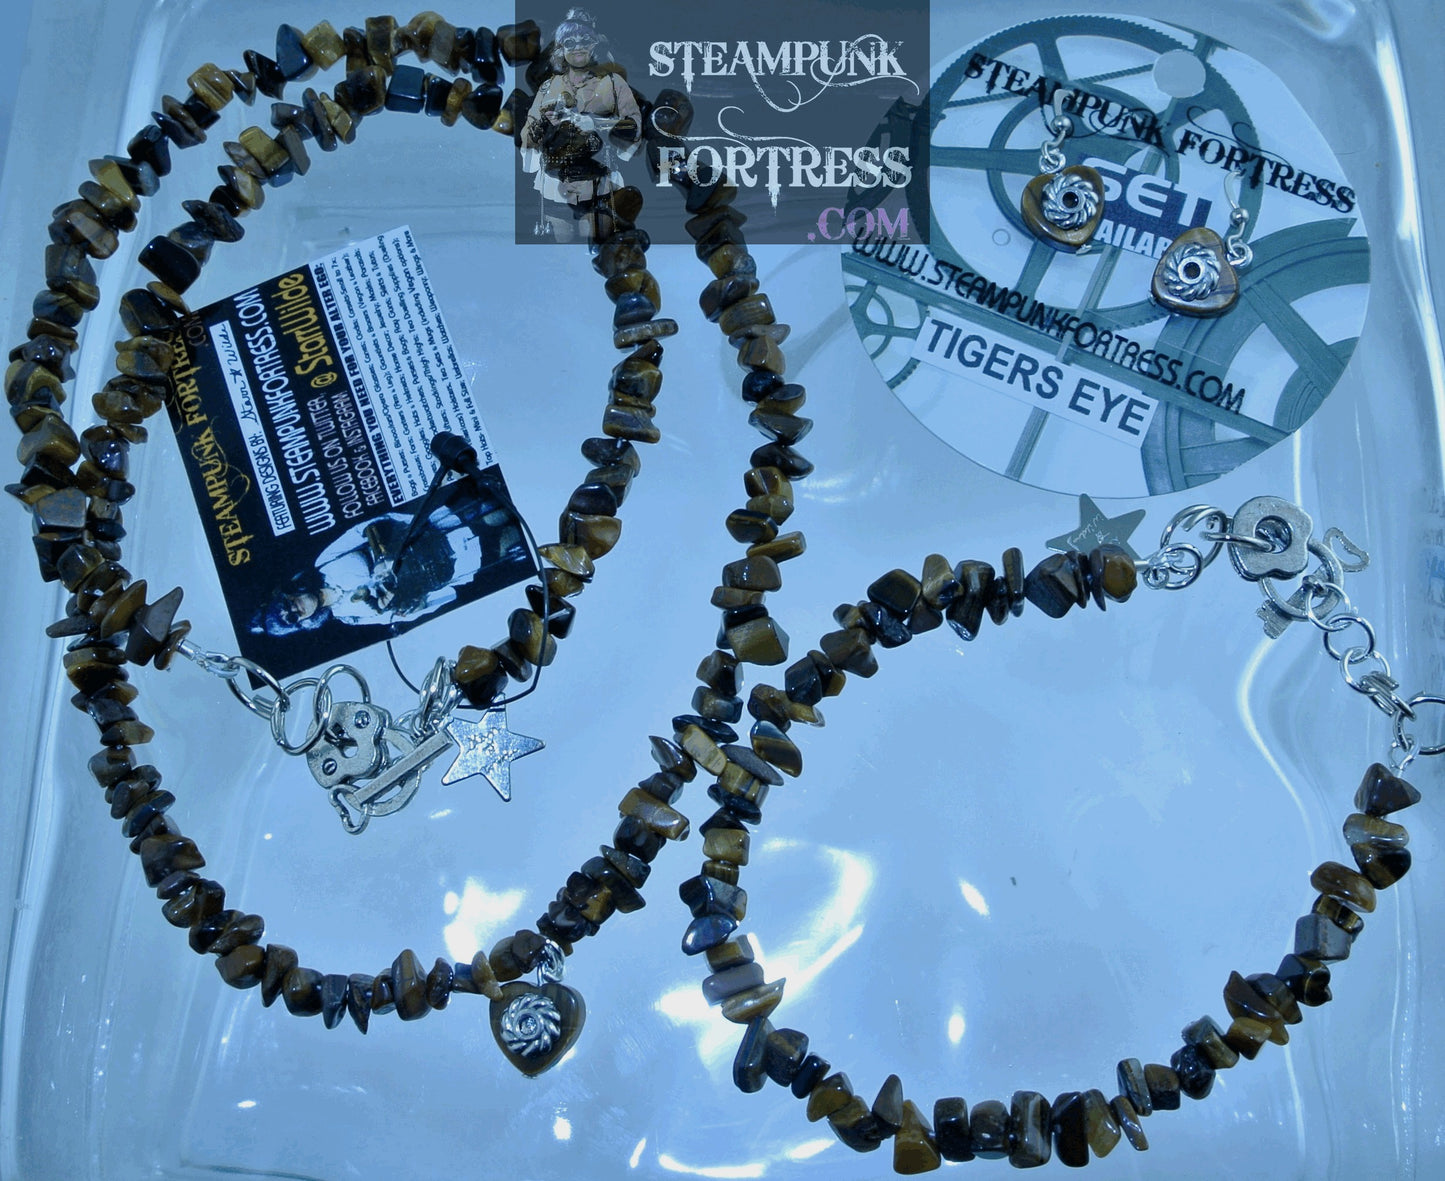 SILVER TIGERS EYE GEMSTONES STONES CHIPS LOCK KEY TOGGLE CLASP BRACELET SET AVAILABLE STARR WILDE STEAMPUNK FORTRESS